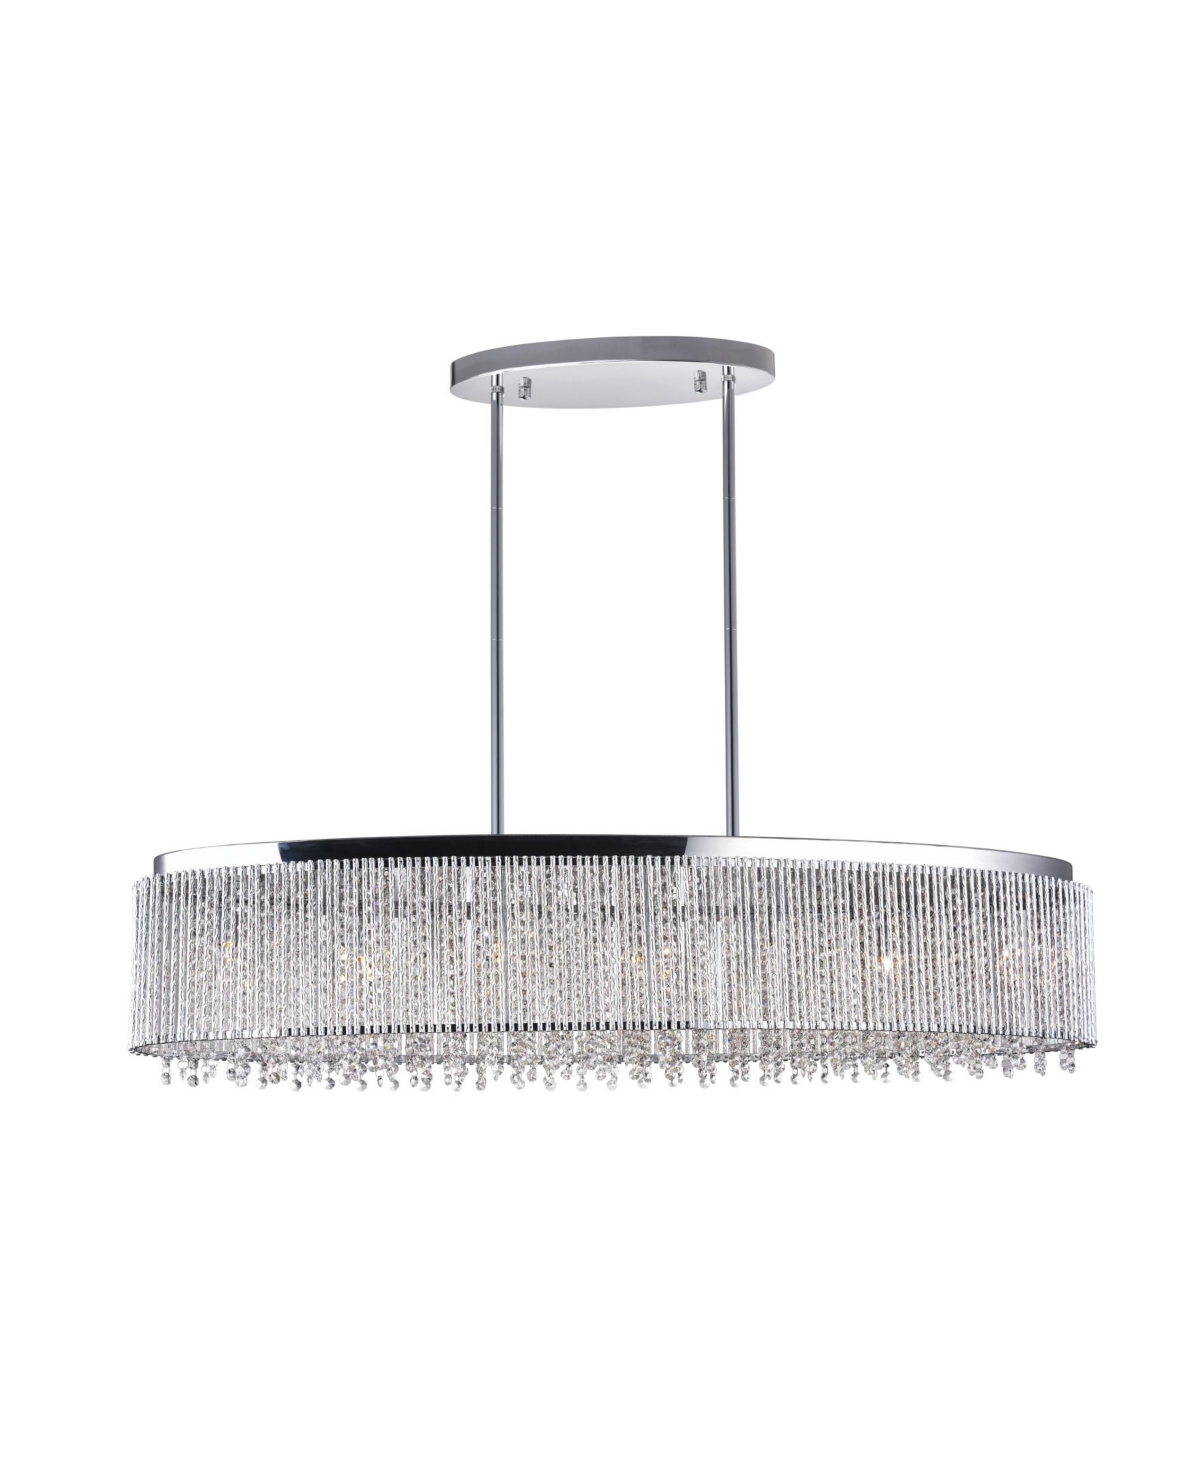 Shop Cwi Lighting Claire 7 Light Chandelier In Chrome